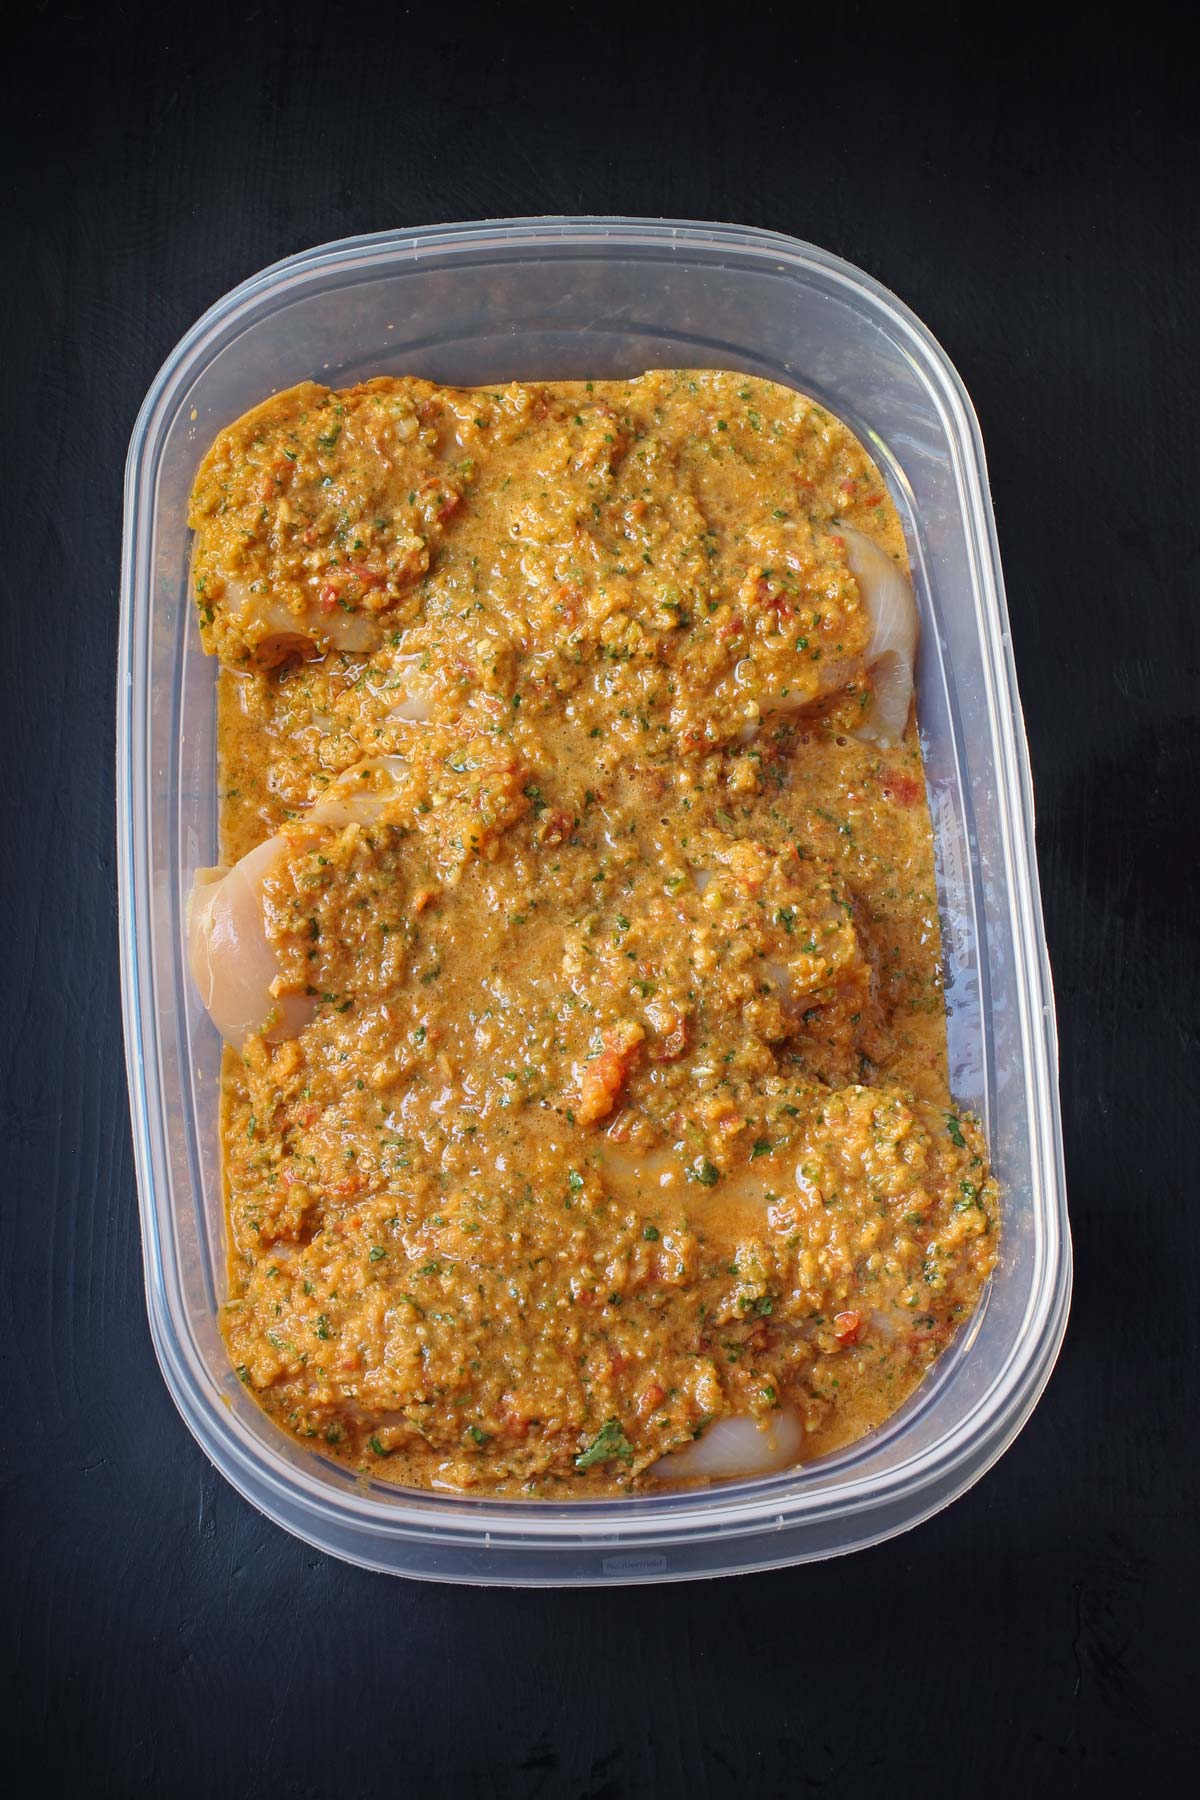 spicy chicken marinade and chicken breast in plastic container for freezing.